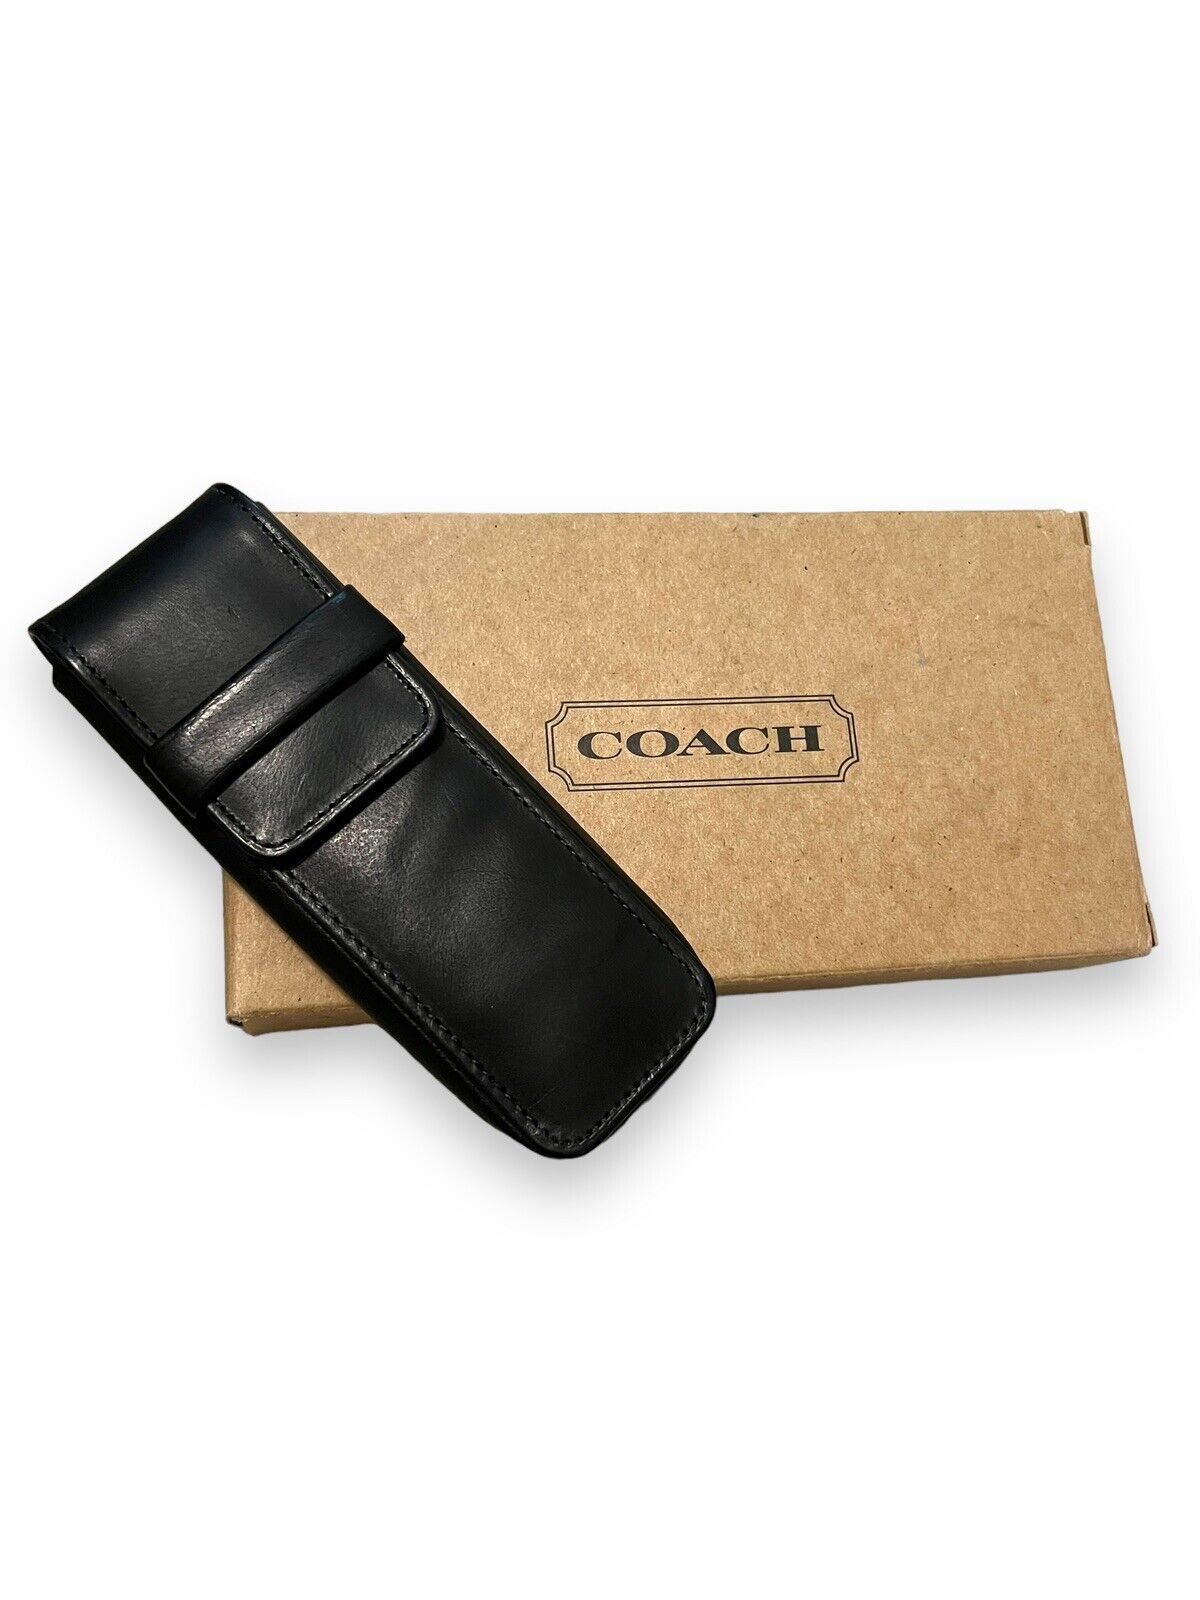 Vintage 90s Coach Black Leather Pen Case W/ belt loop New In Box With Tags